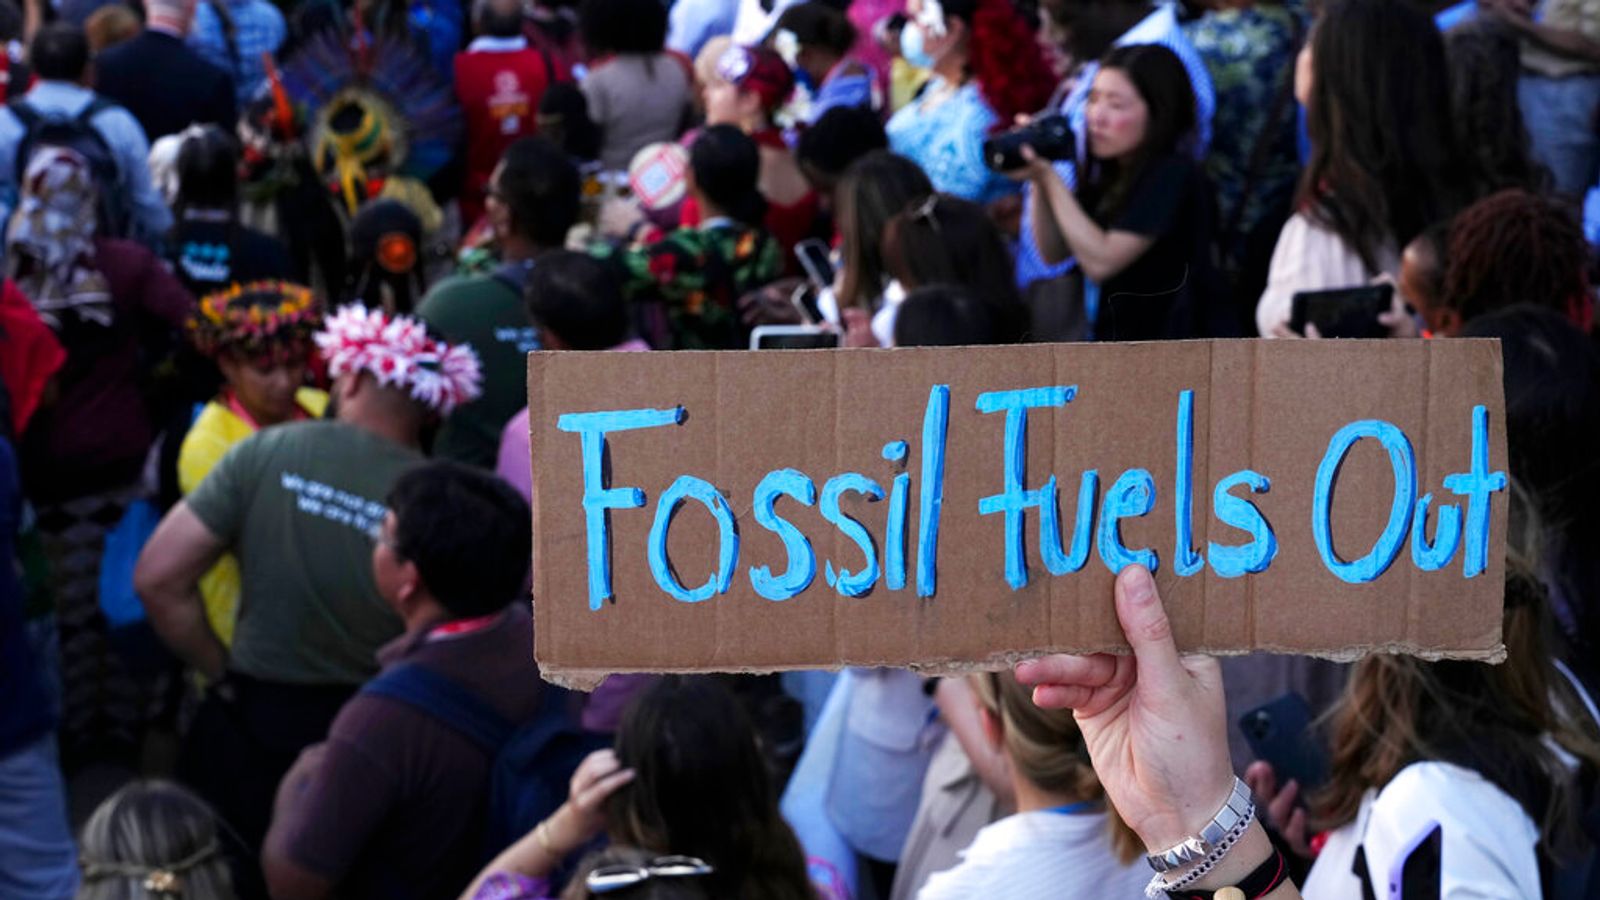 Crack down on fossil fuel lobbyists at COP climate talks, global groups urge the United Nations